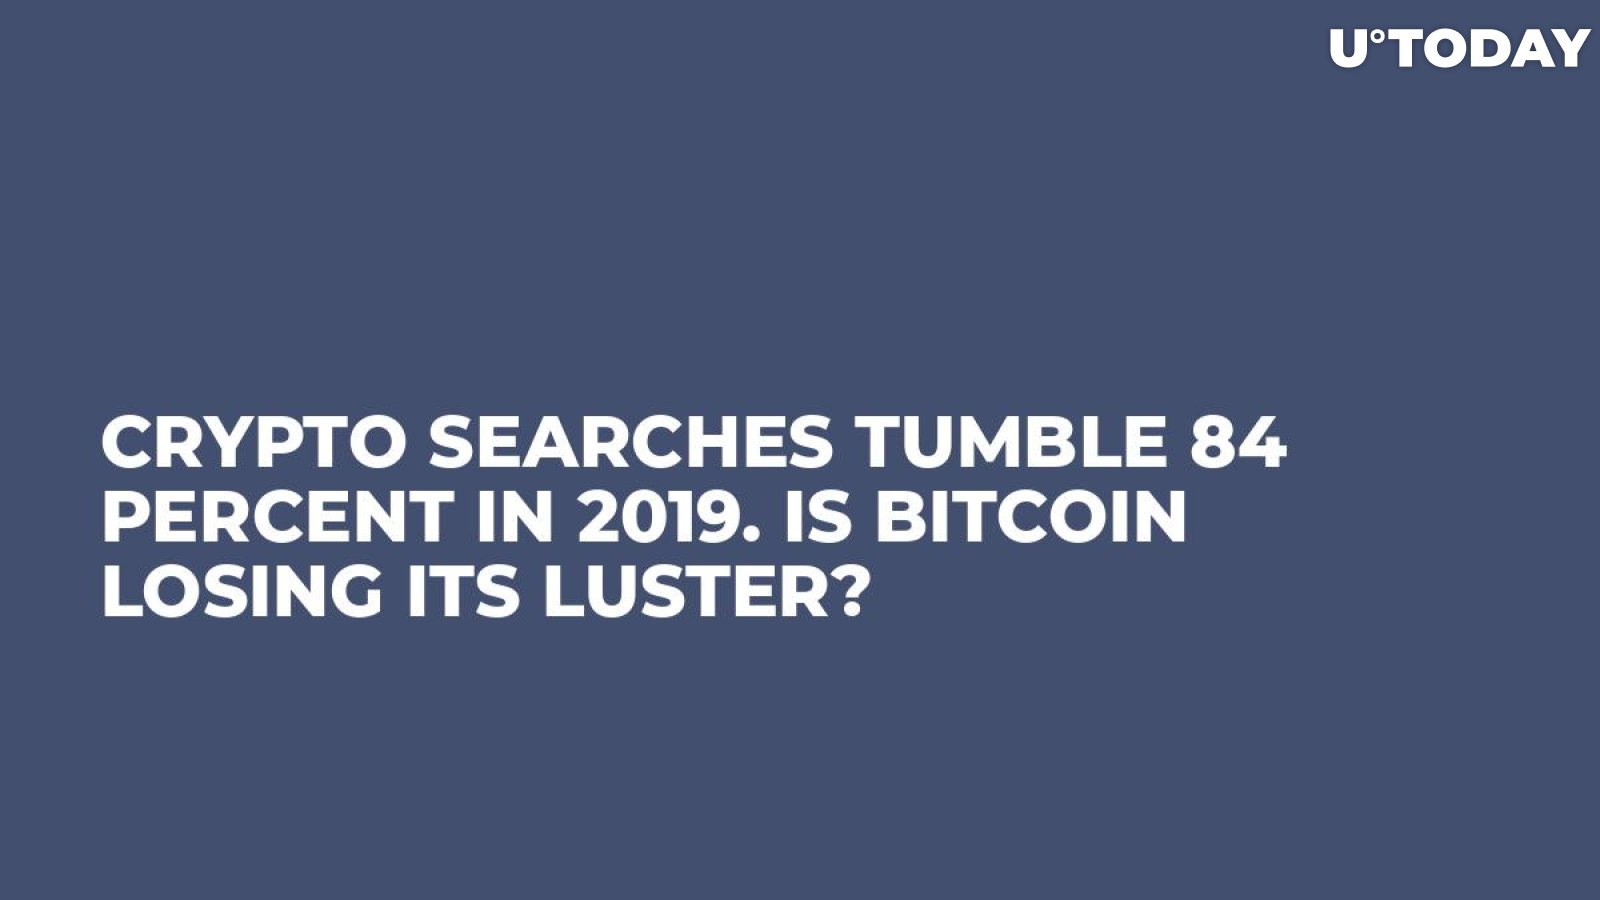 Crypto Searches Tumble 84 Percent in 2019. Is Bitcoin Losing Its Luster?